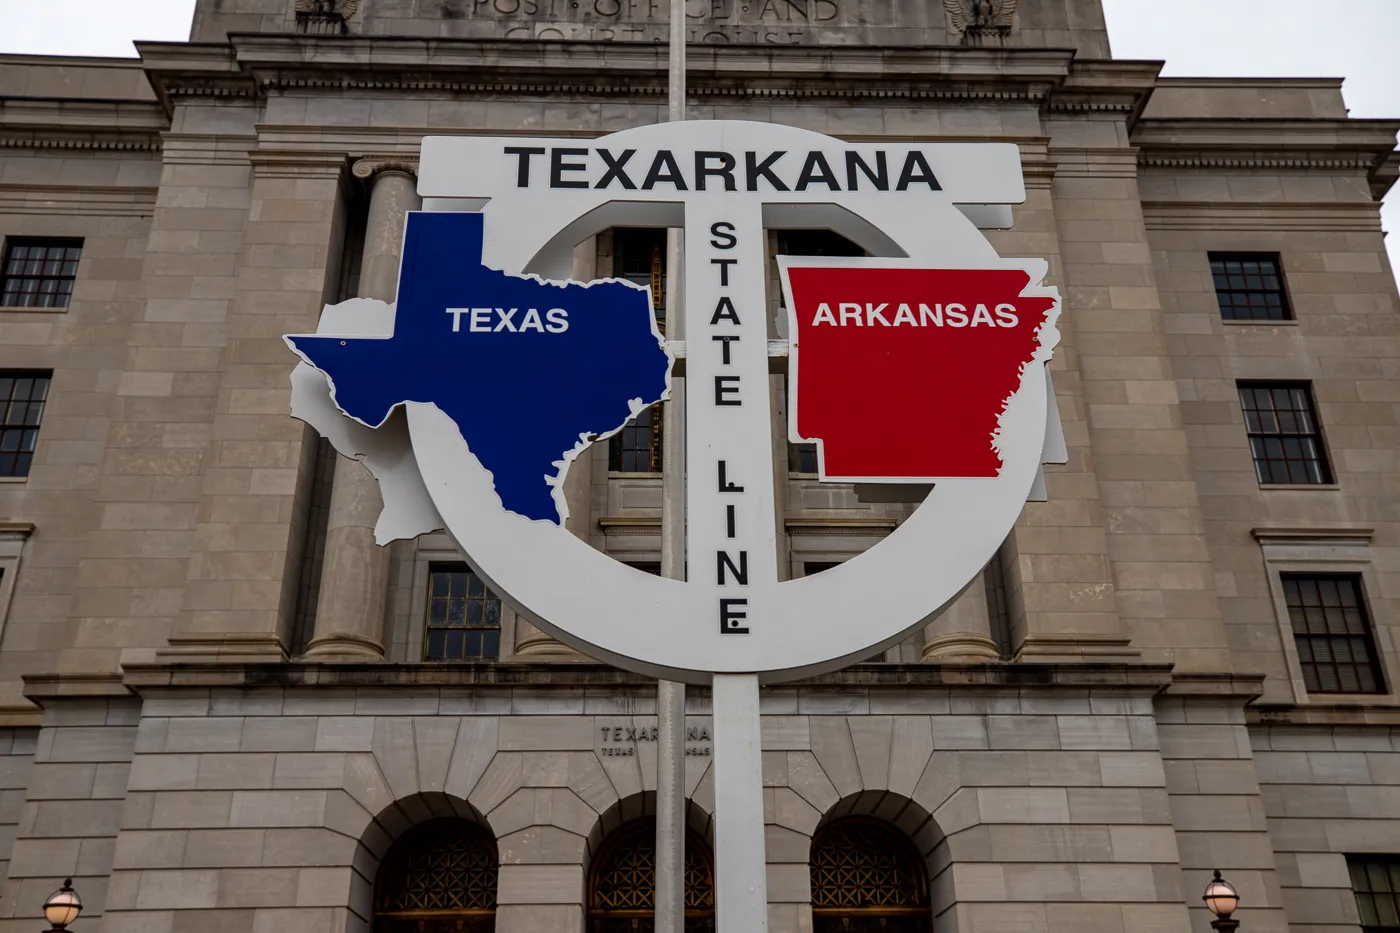 Texarkana State Line Sign at the post office that straddled the Texas and Arkansas borders